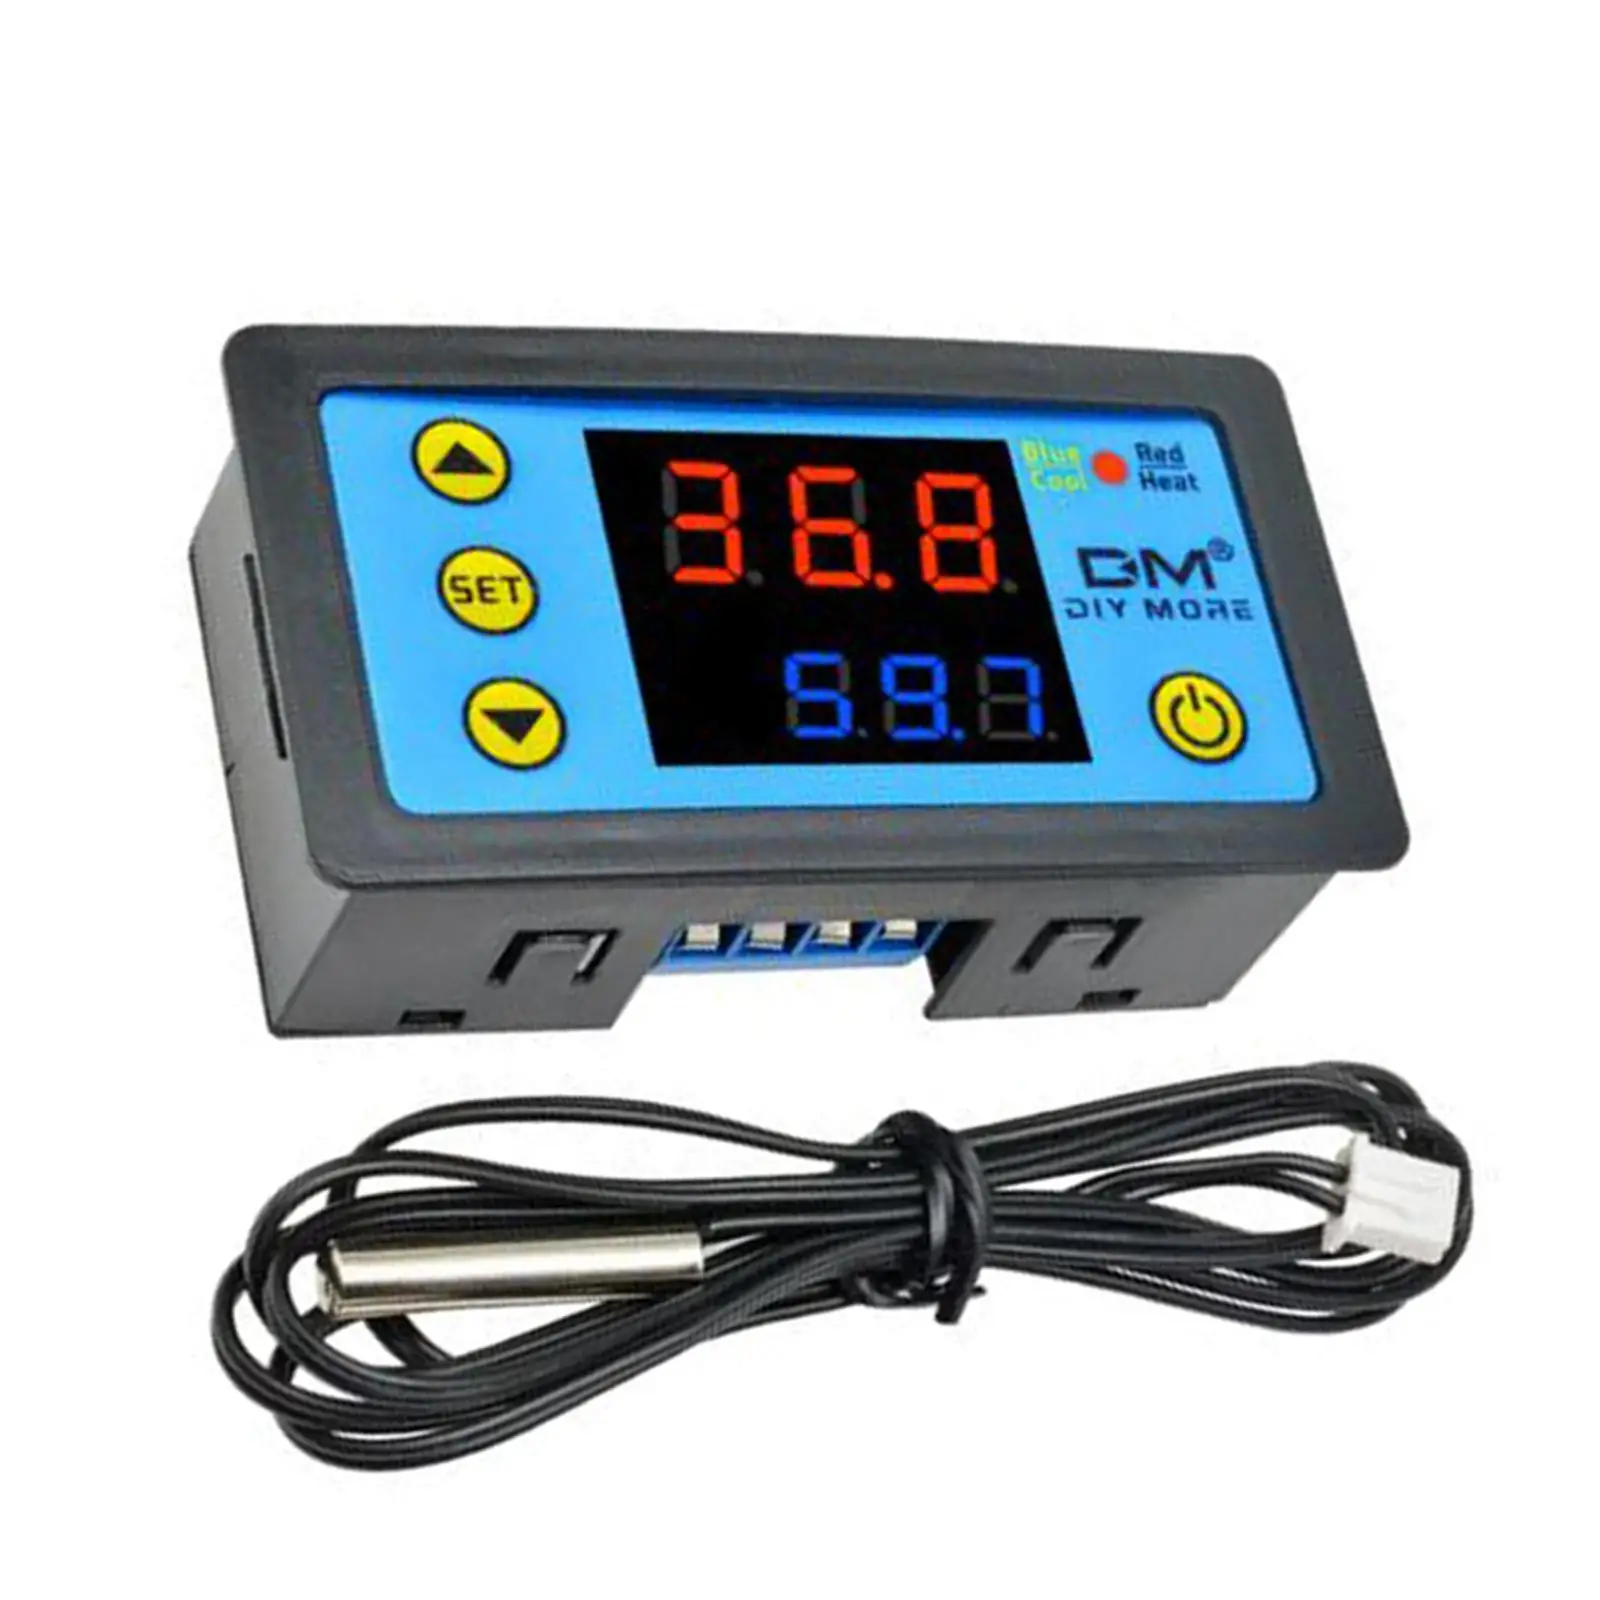 220V AC Digital LED Temperature Controller W3231 For Incubator cooling and heating Switch Thermostat NTC Sensor